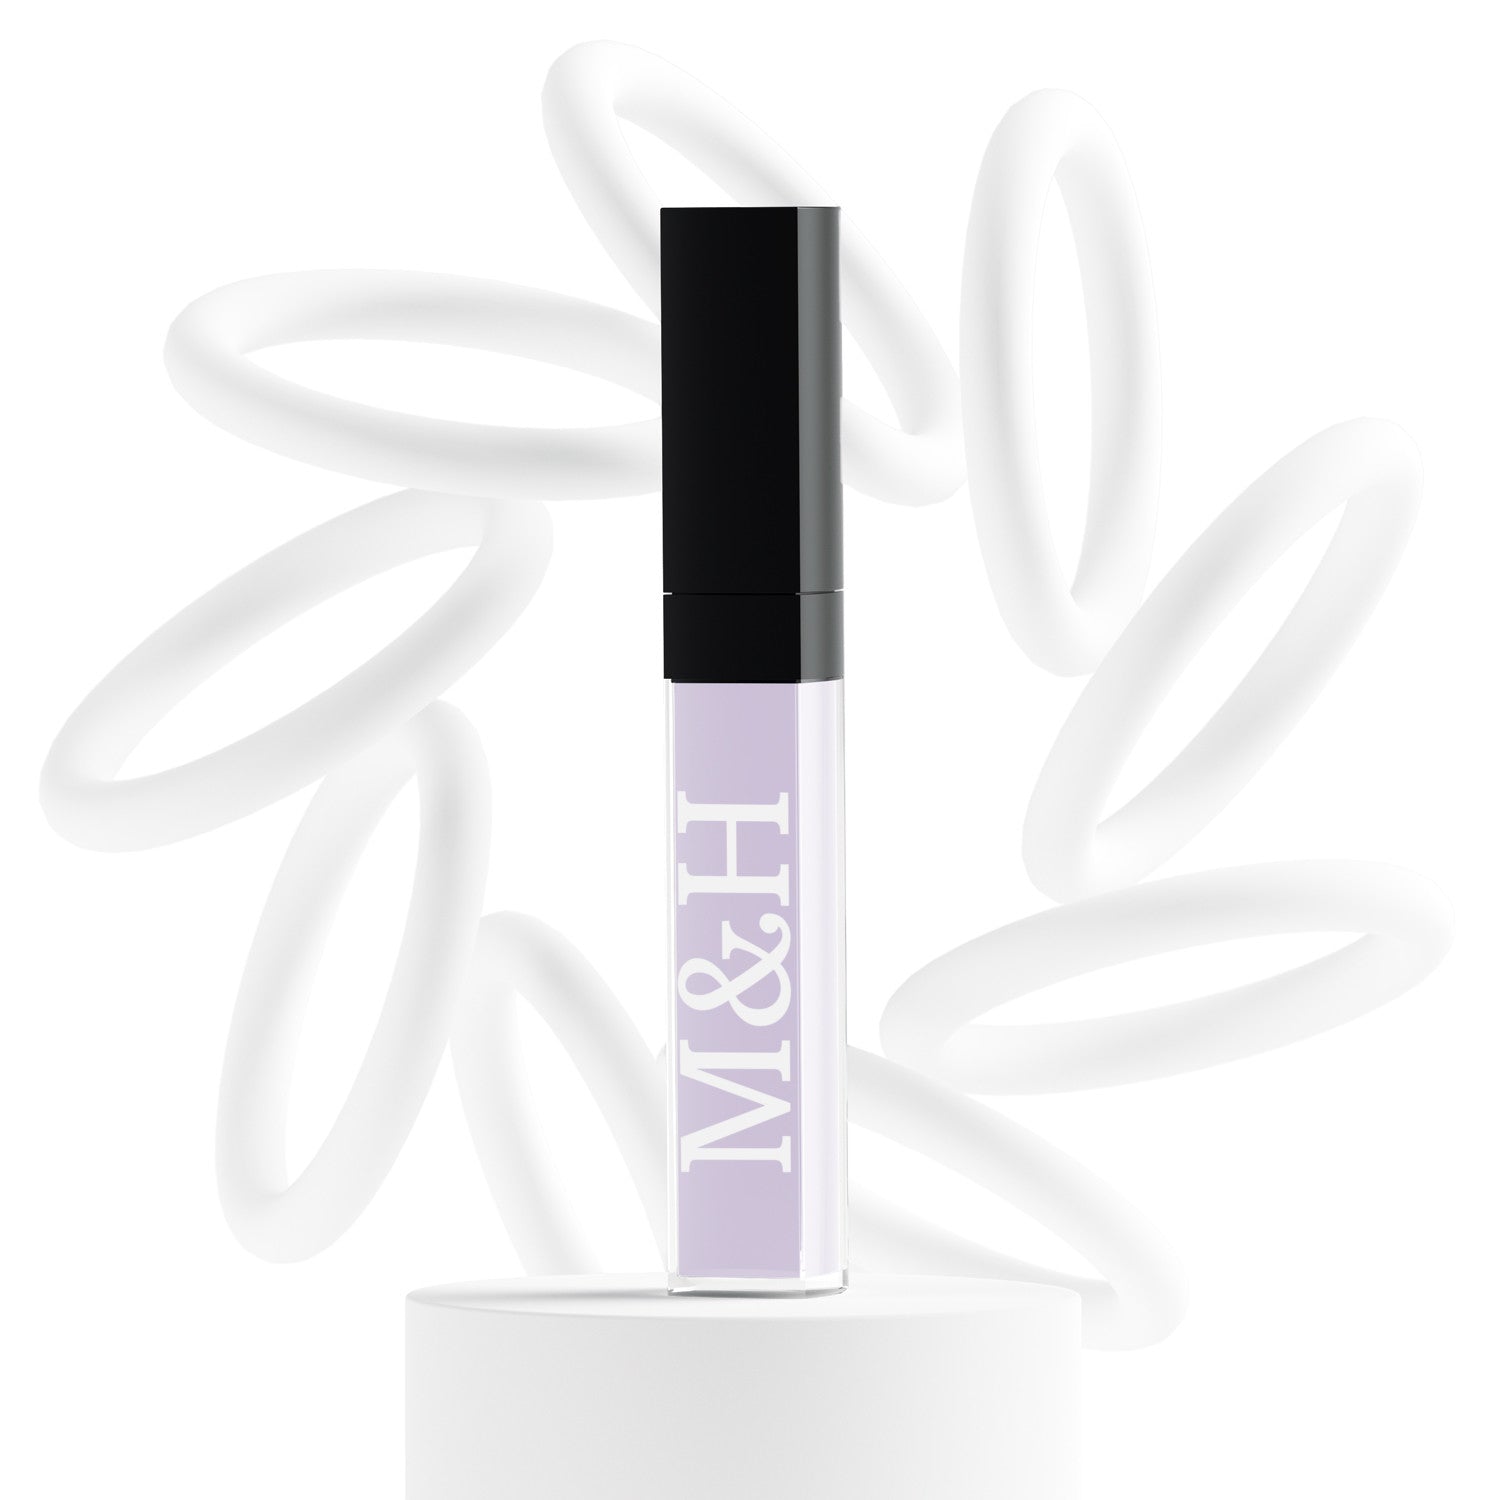 Vegan Concealers - M&H FashionVegan ConcealersconcealerM&H FashionM&H FashionConcealer-941Lilac CorrectorVegan ConcealersM&H FashionconcealerM&H Fashion This multifunctional concealer is designed to cover under-eye circles, complexion alterations, and major imperfections like scars, hyperpigmentation, burns, and tatVegan Concealers